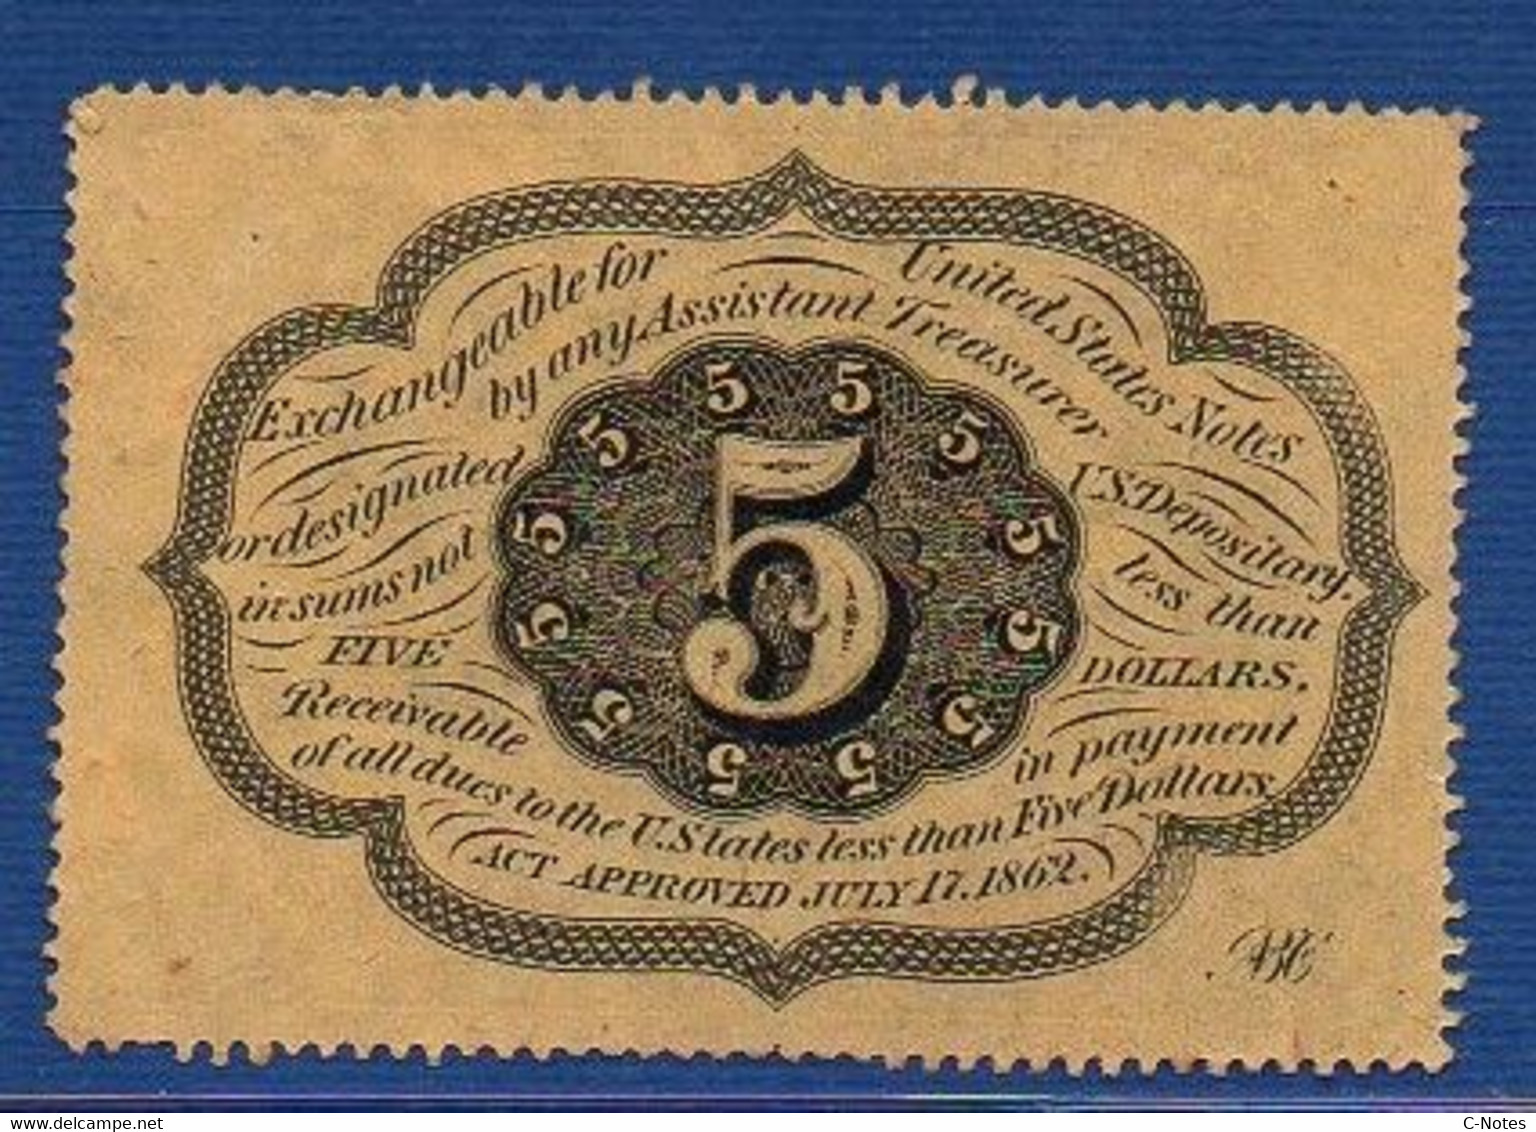 UNITED STATES OF AMERICA - P. 97a – 5 Cents 1862 AUNC, No Serial Number - 1862 : 1 Uitgave